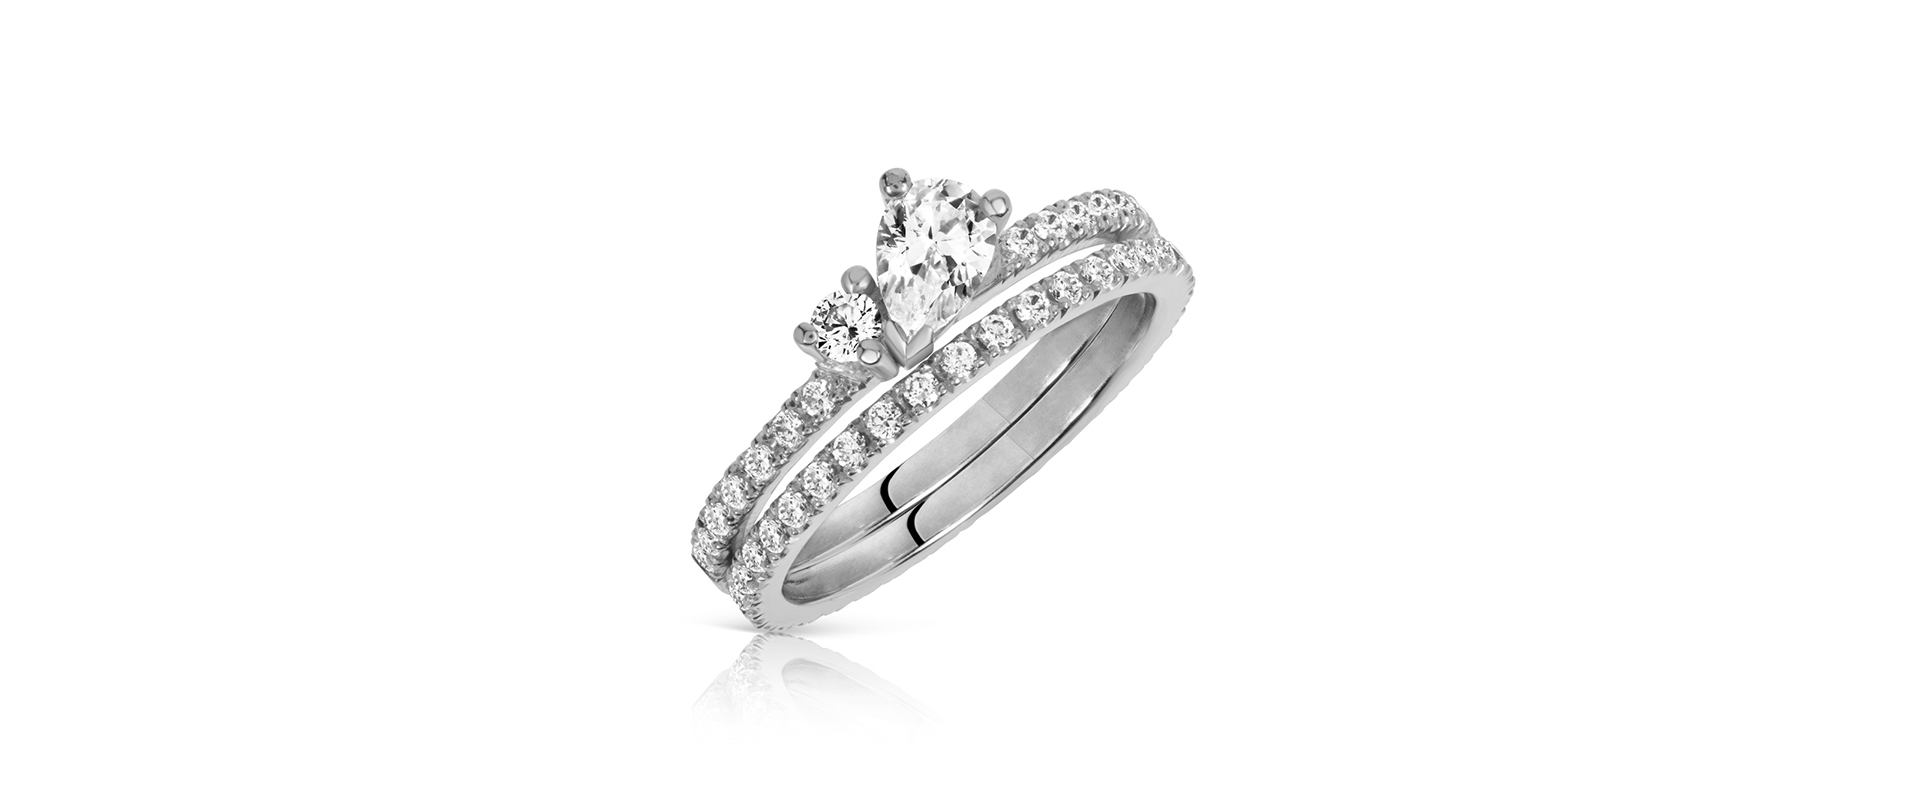 Astral cluster engagement ring 5 pear diamond with wedding band - platinum